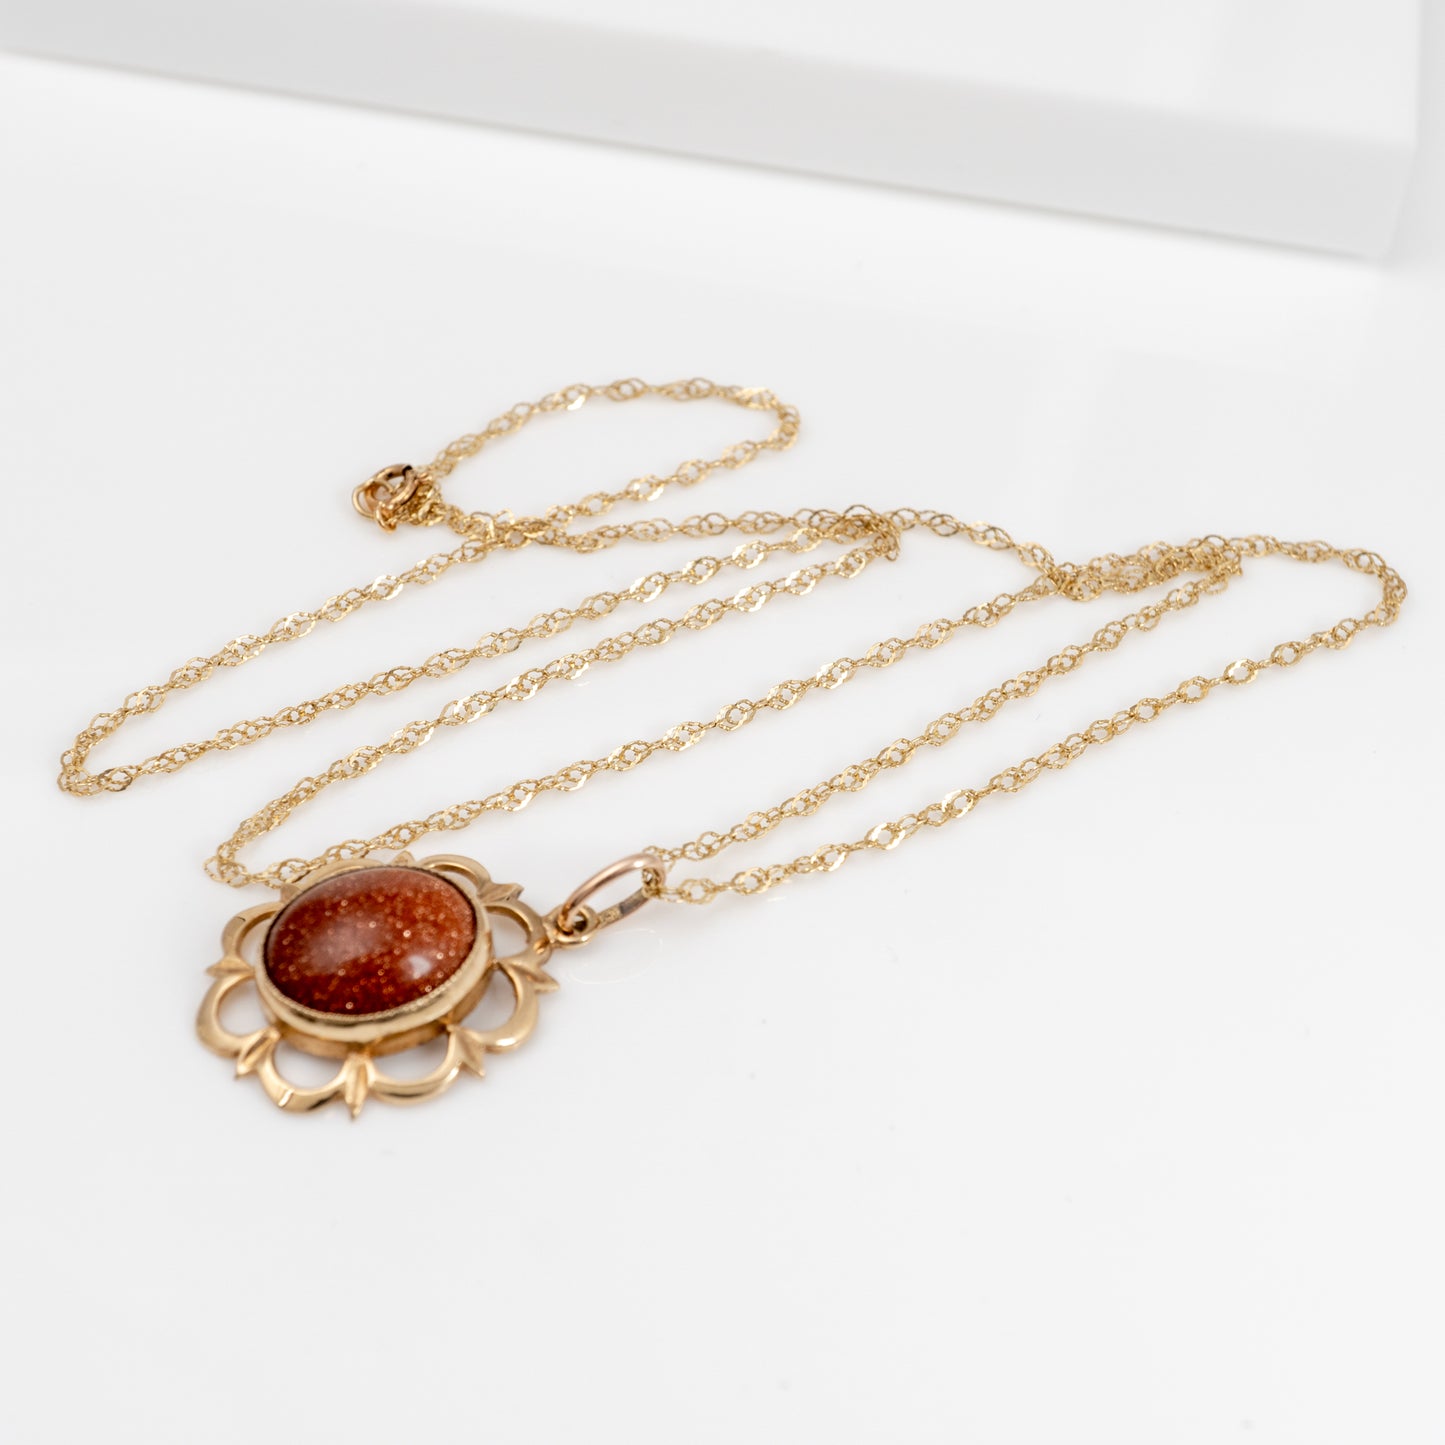 9ct Yellow Gold Necklace Featuring Goldstone Crystal